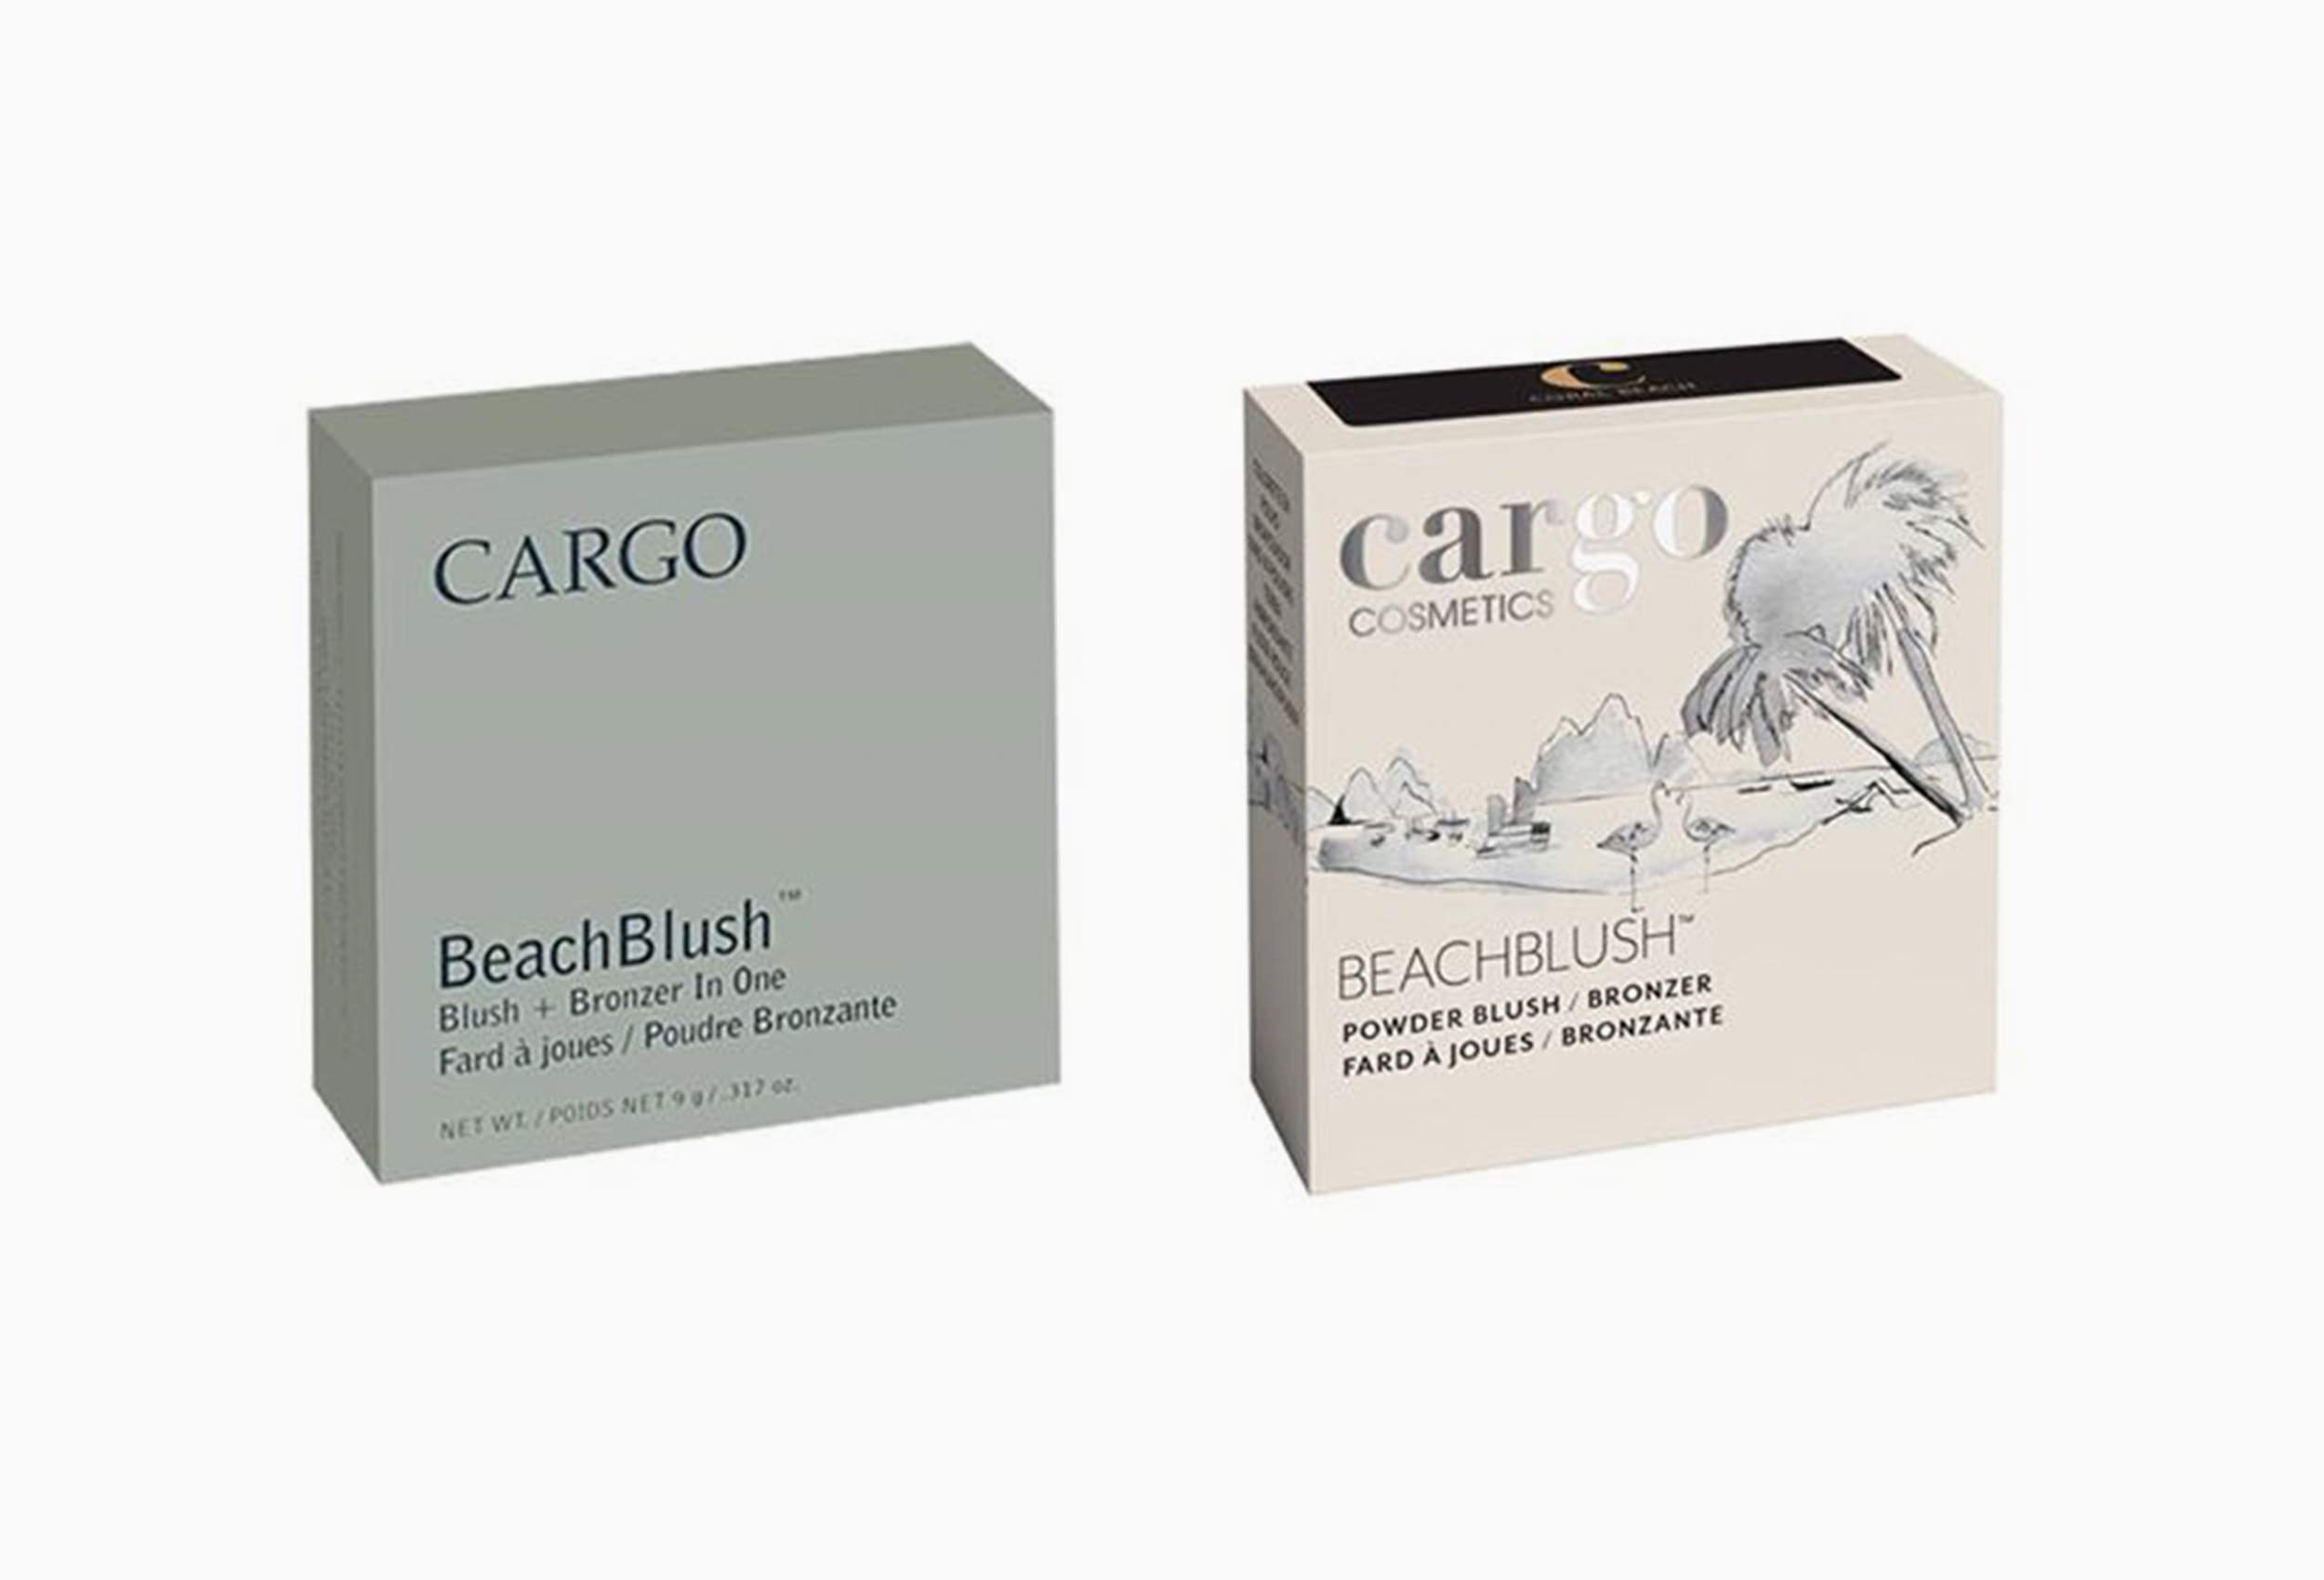   Cargo secondary packaging: Before and After  